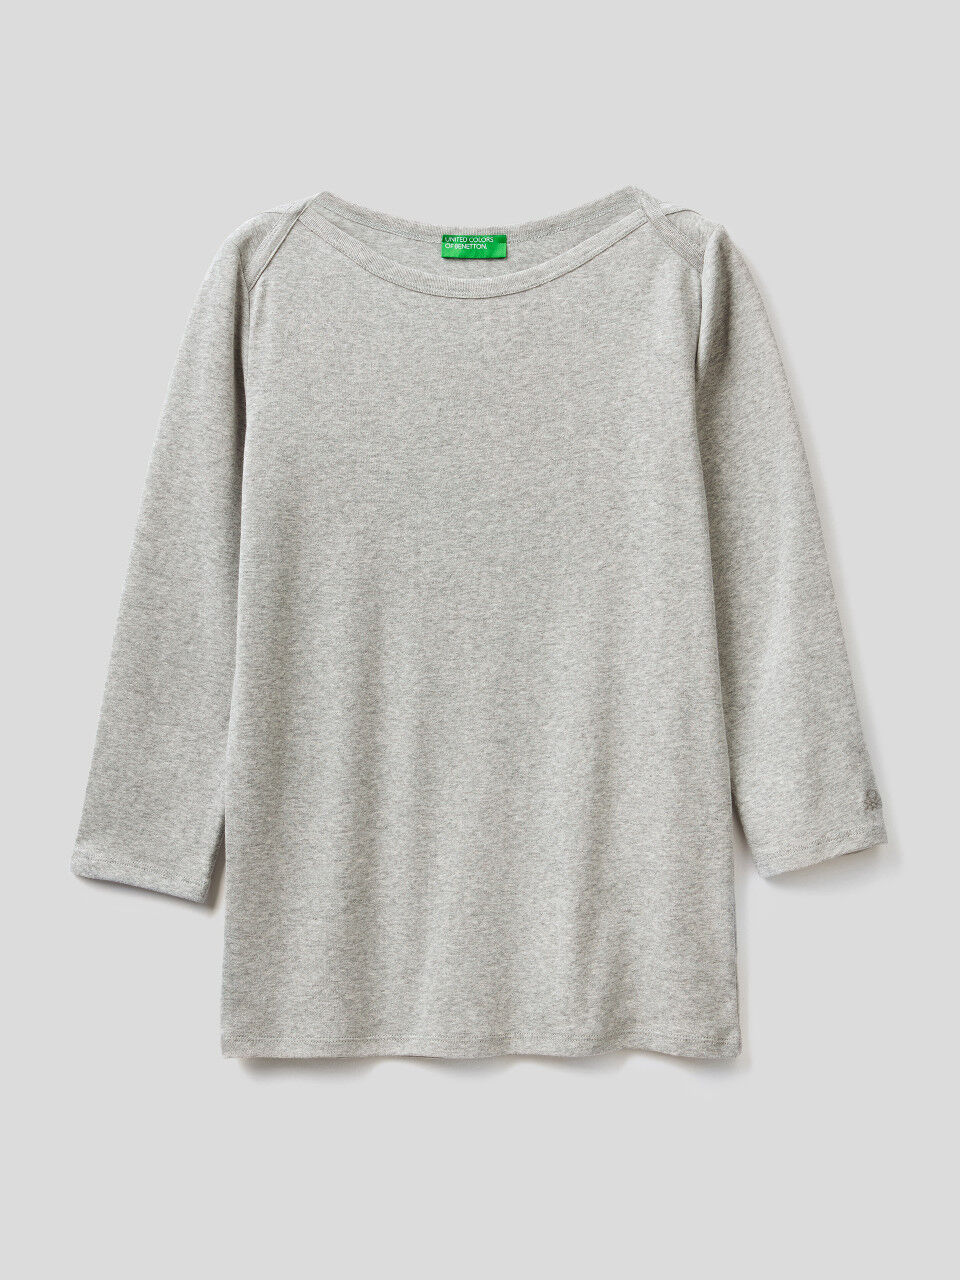 Women's T-shirts and Tops New Collection 2022 | Benetton